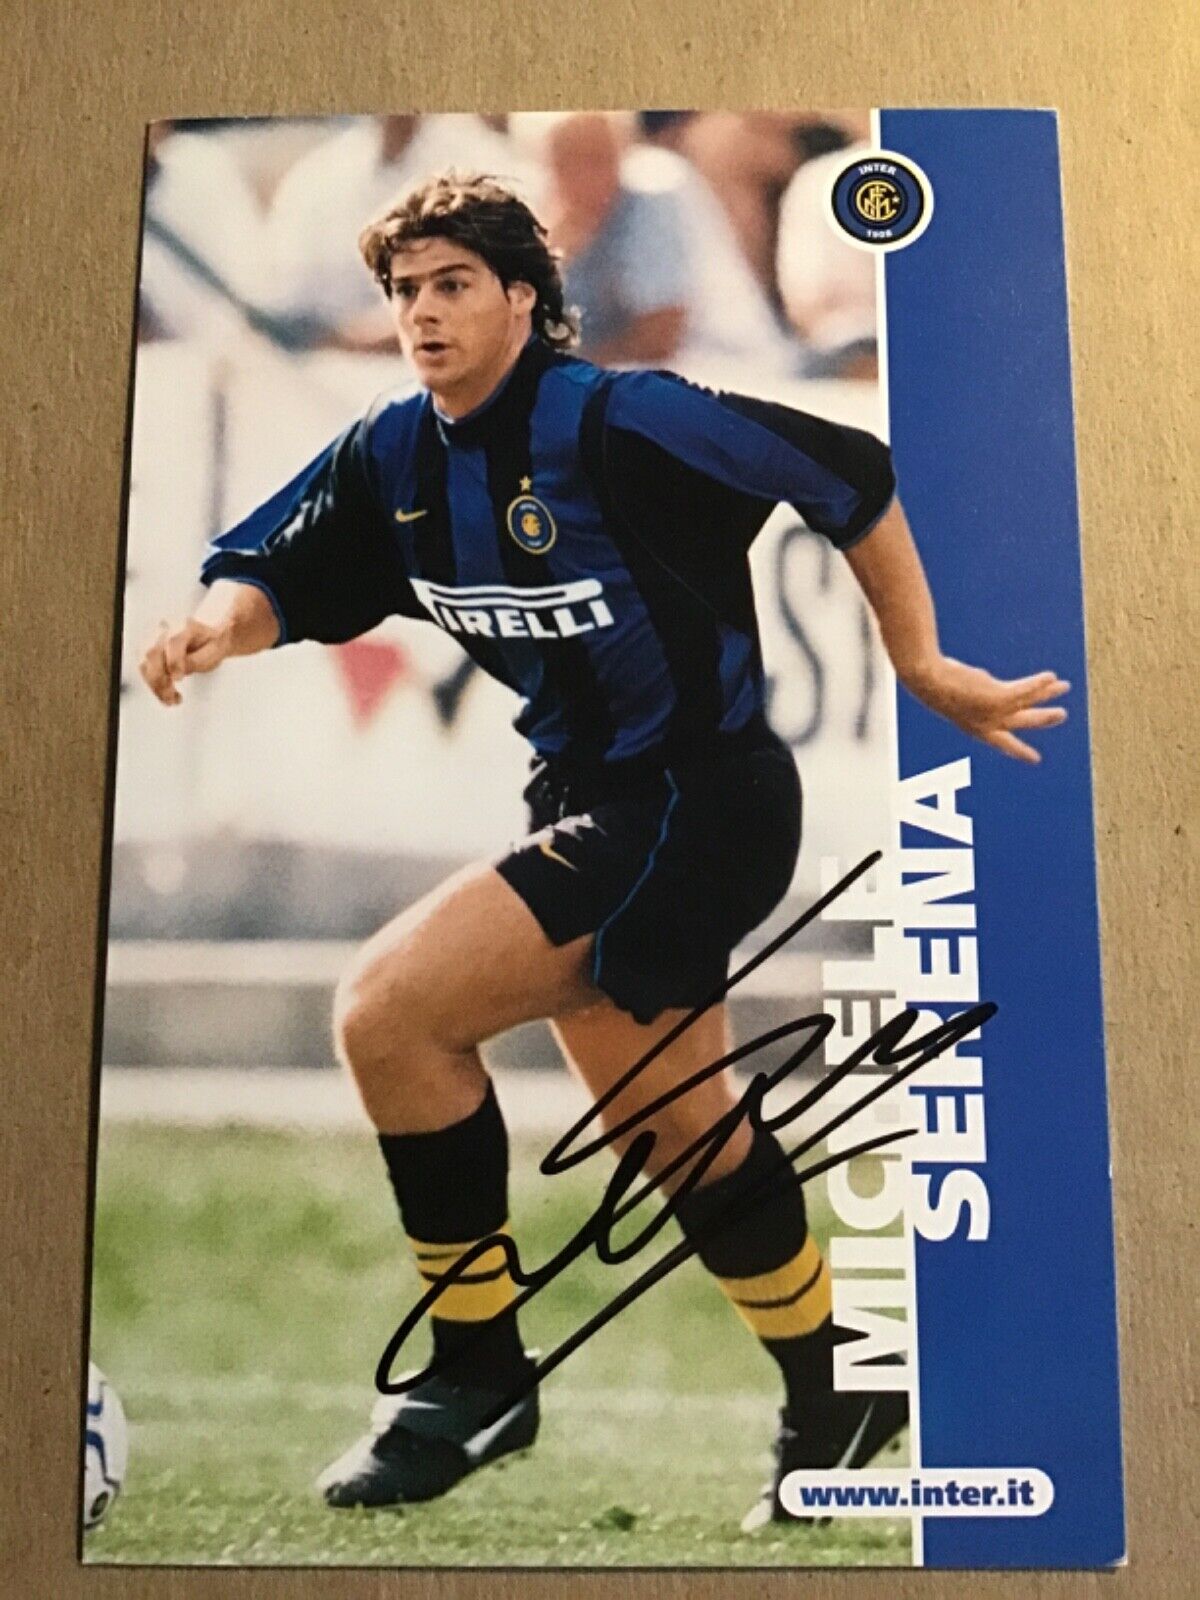 Michele Serena, Italy 🇮🇹 Inter Milan 2000/01 hand signed